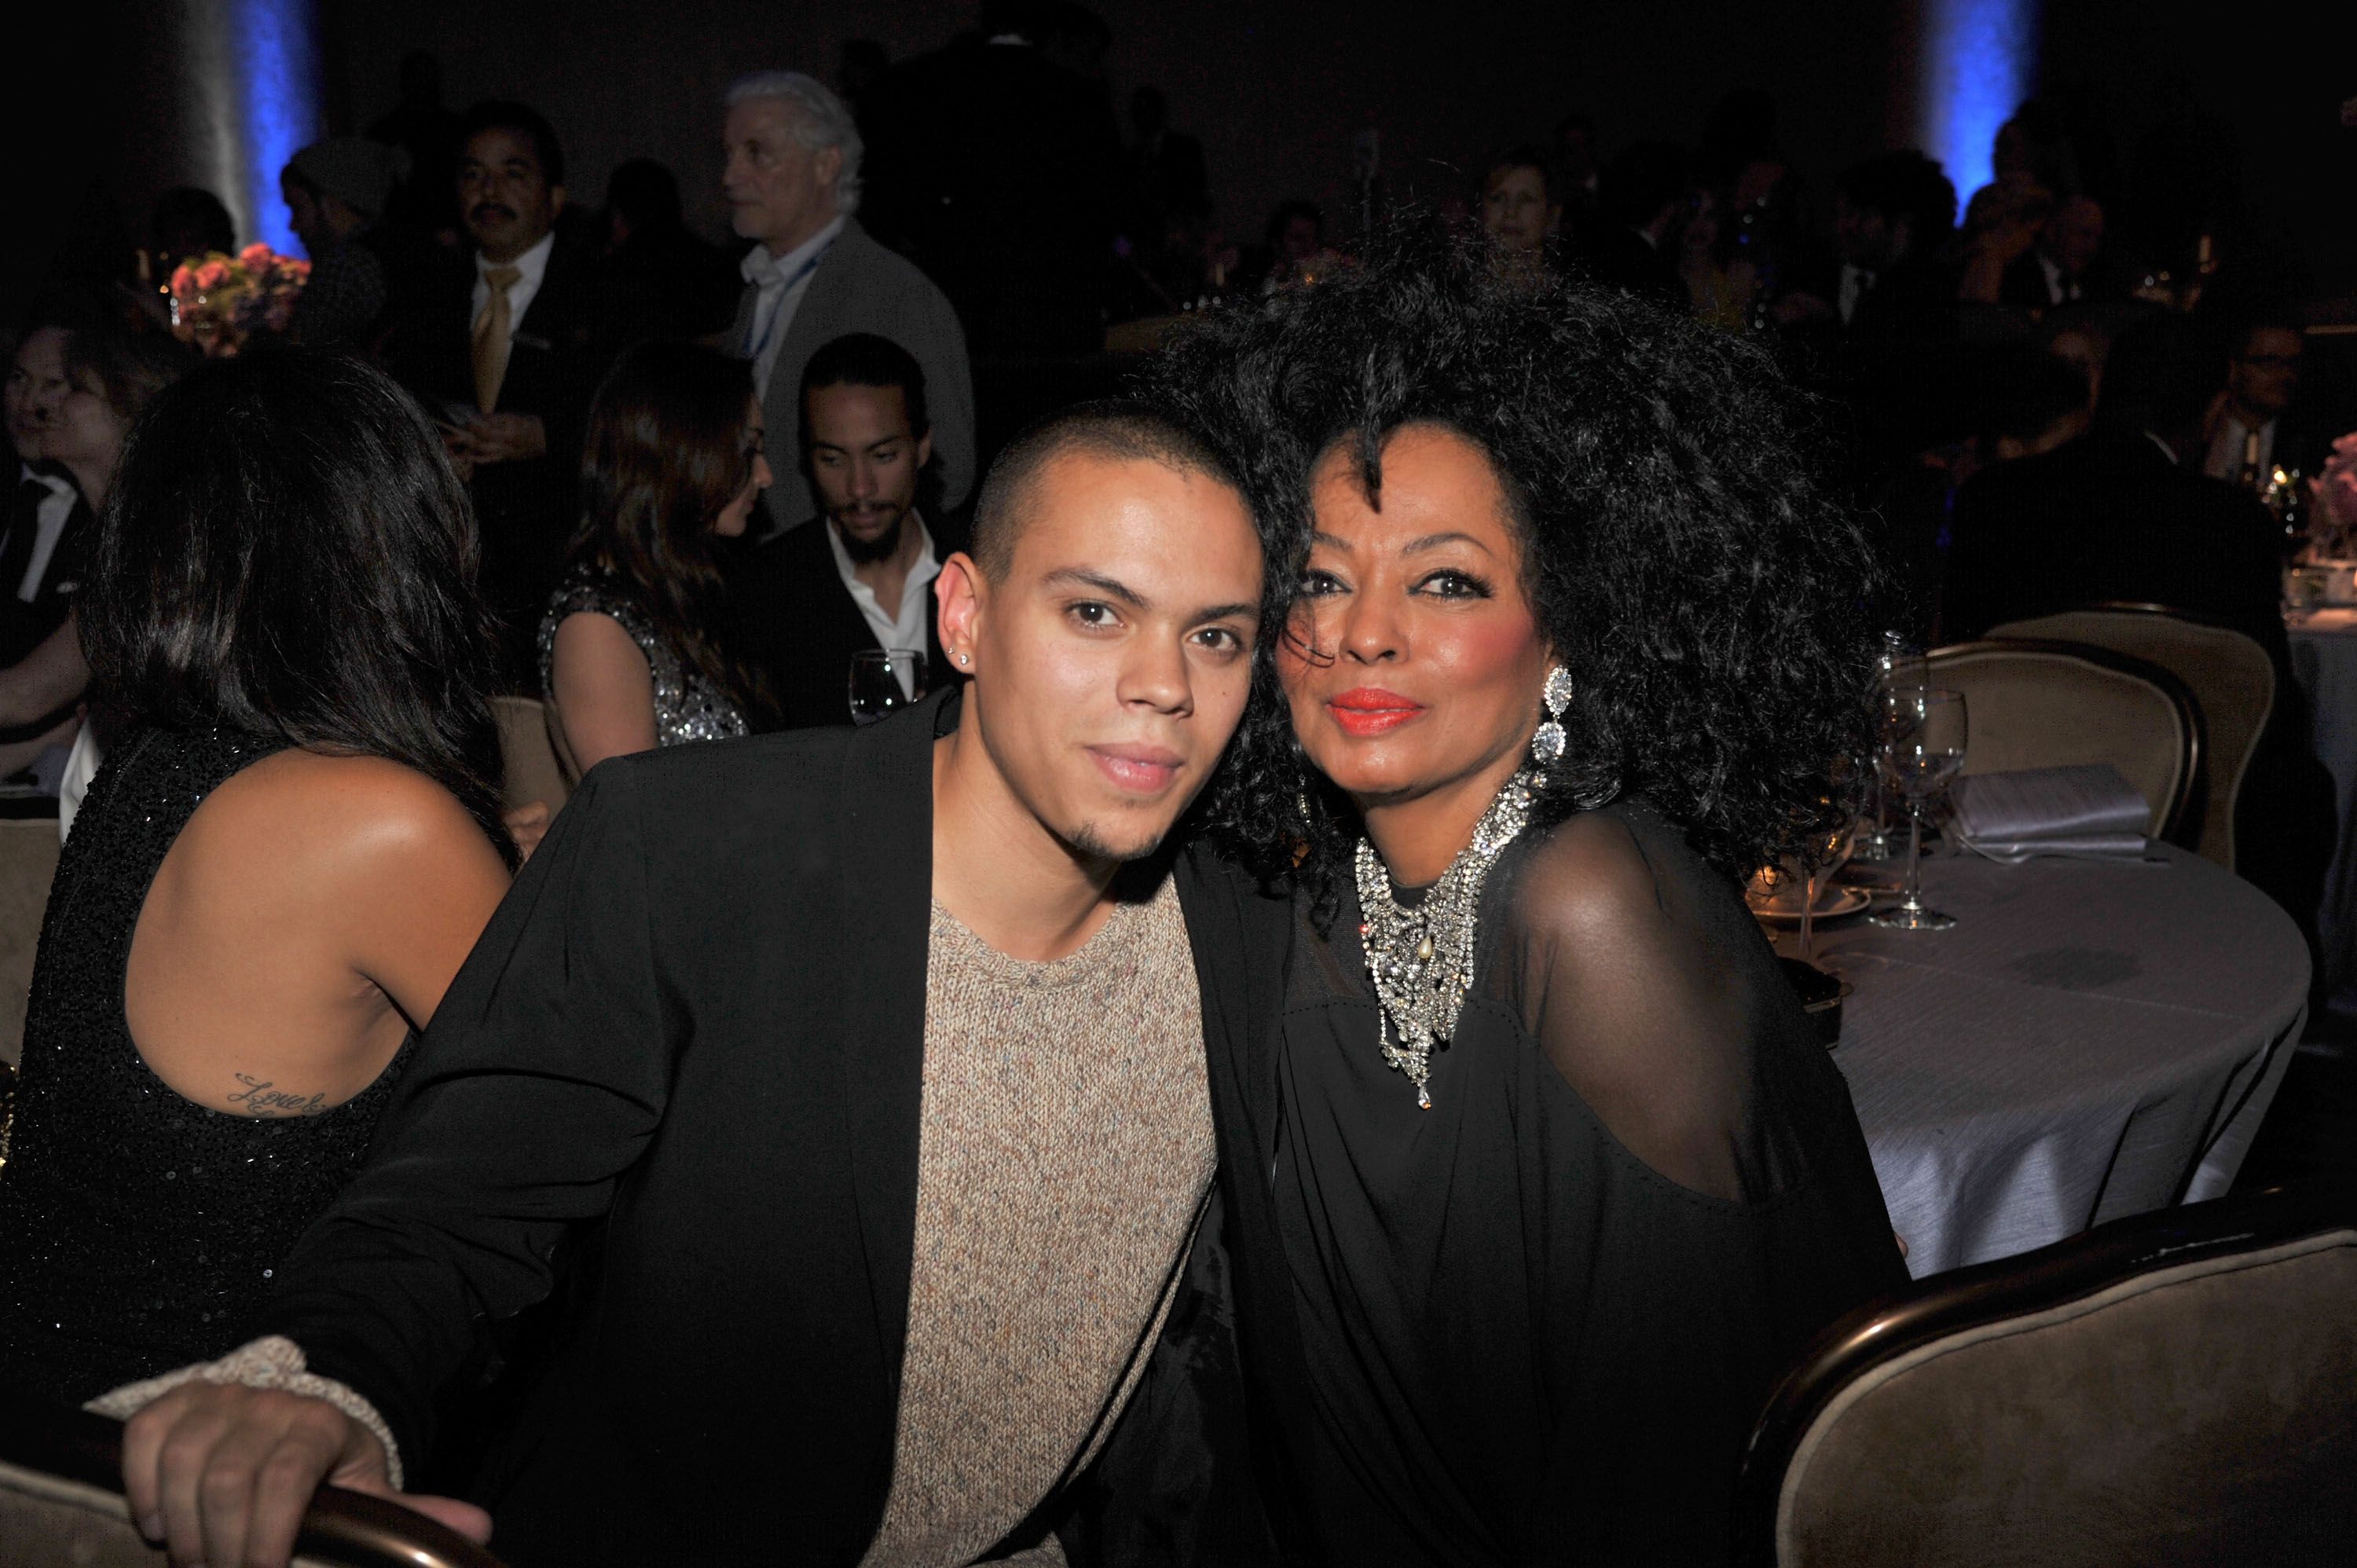 Evan Ross and Diana Ross during the Clive Davis and The Recording Academy's 2012 Pre-Grammy Gala and Salute to Industry Icons Honoring Richard Branson at The Beverly Hilton on February 11, 2012 in Beverly Hills, California. | Source: Getty Image